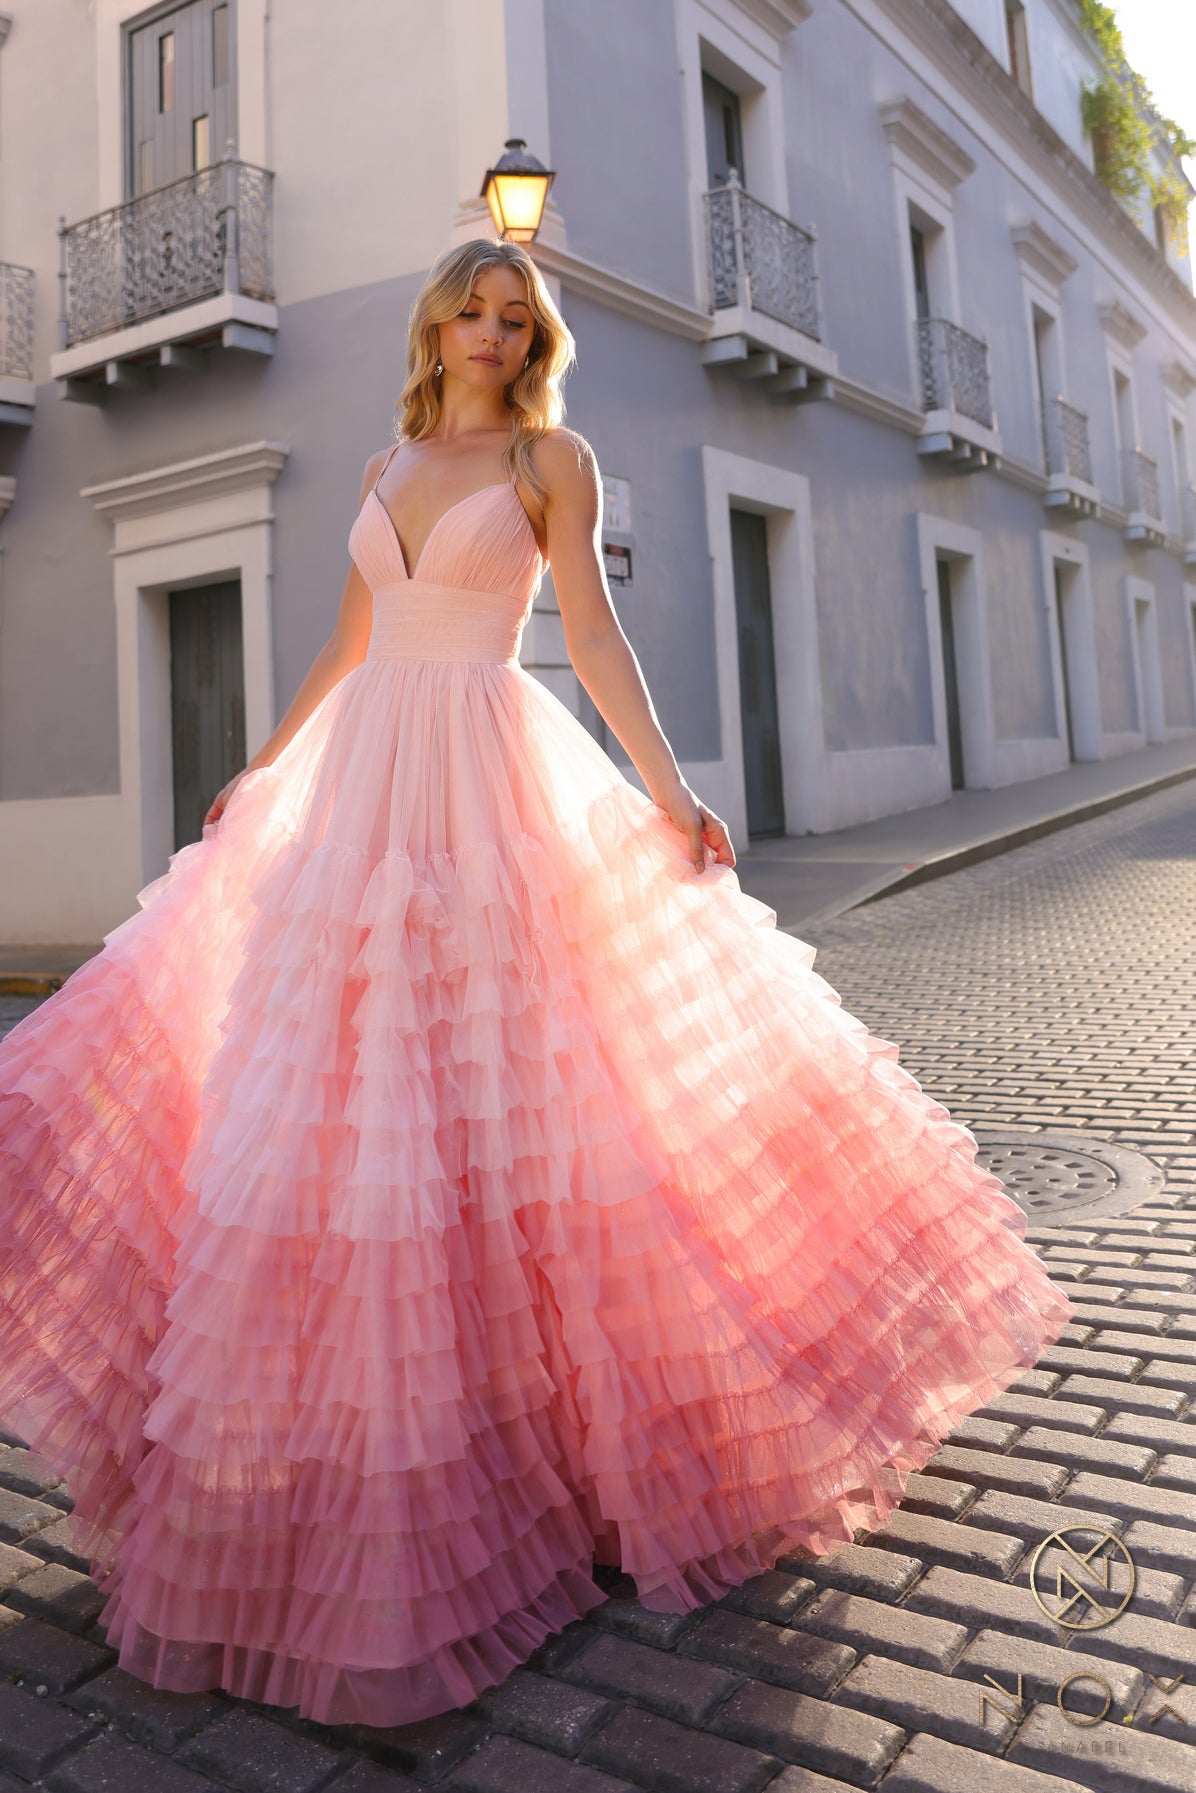 Ombre Tiered Gown | Pink